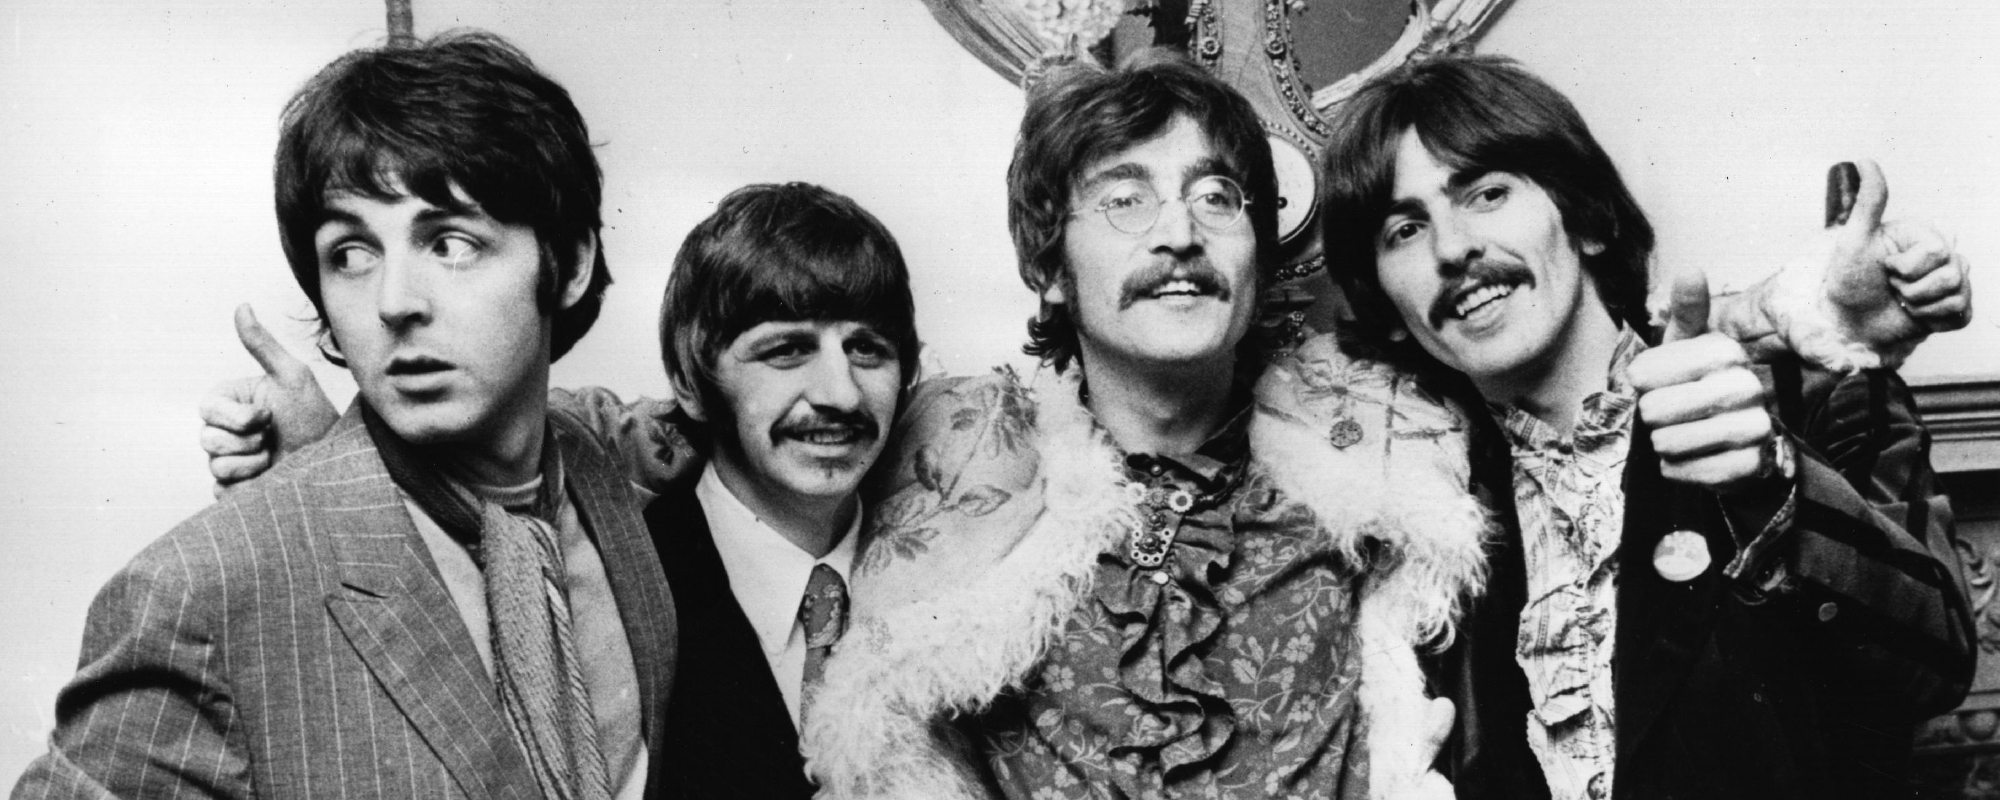 8 of the Best British Bands From the ’60s